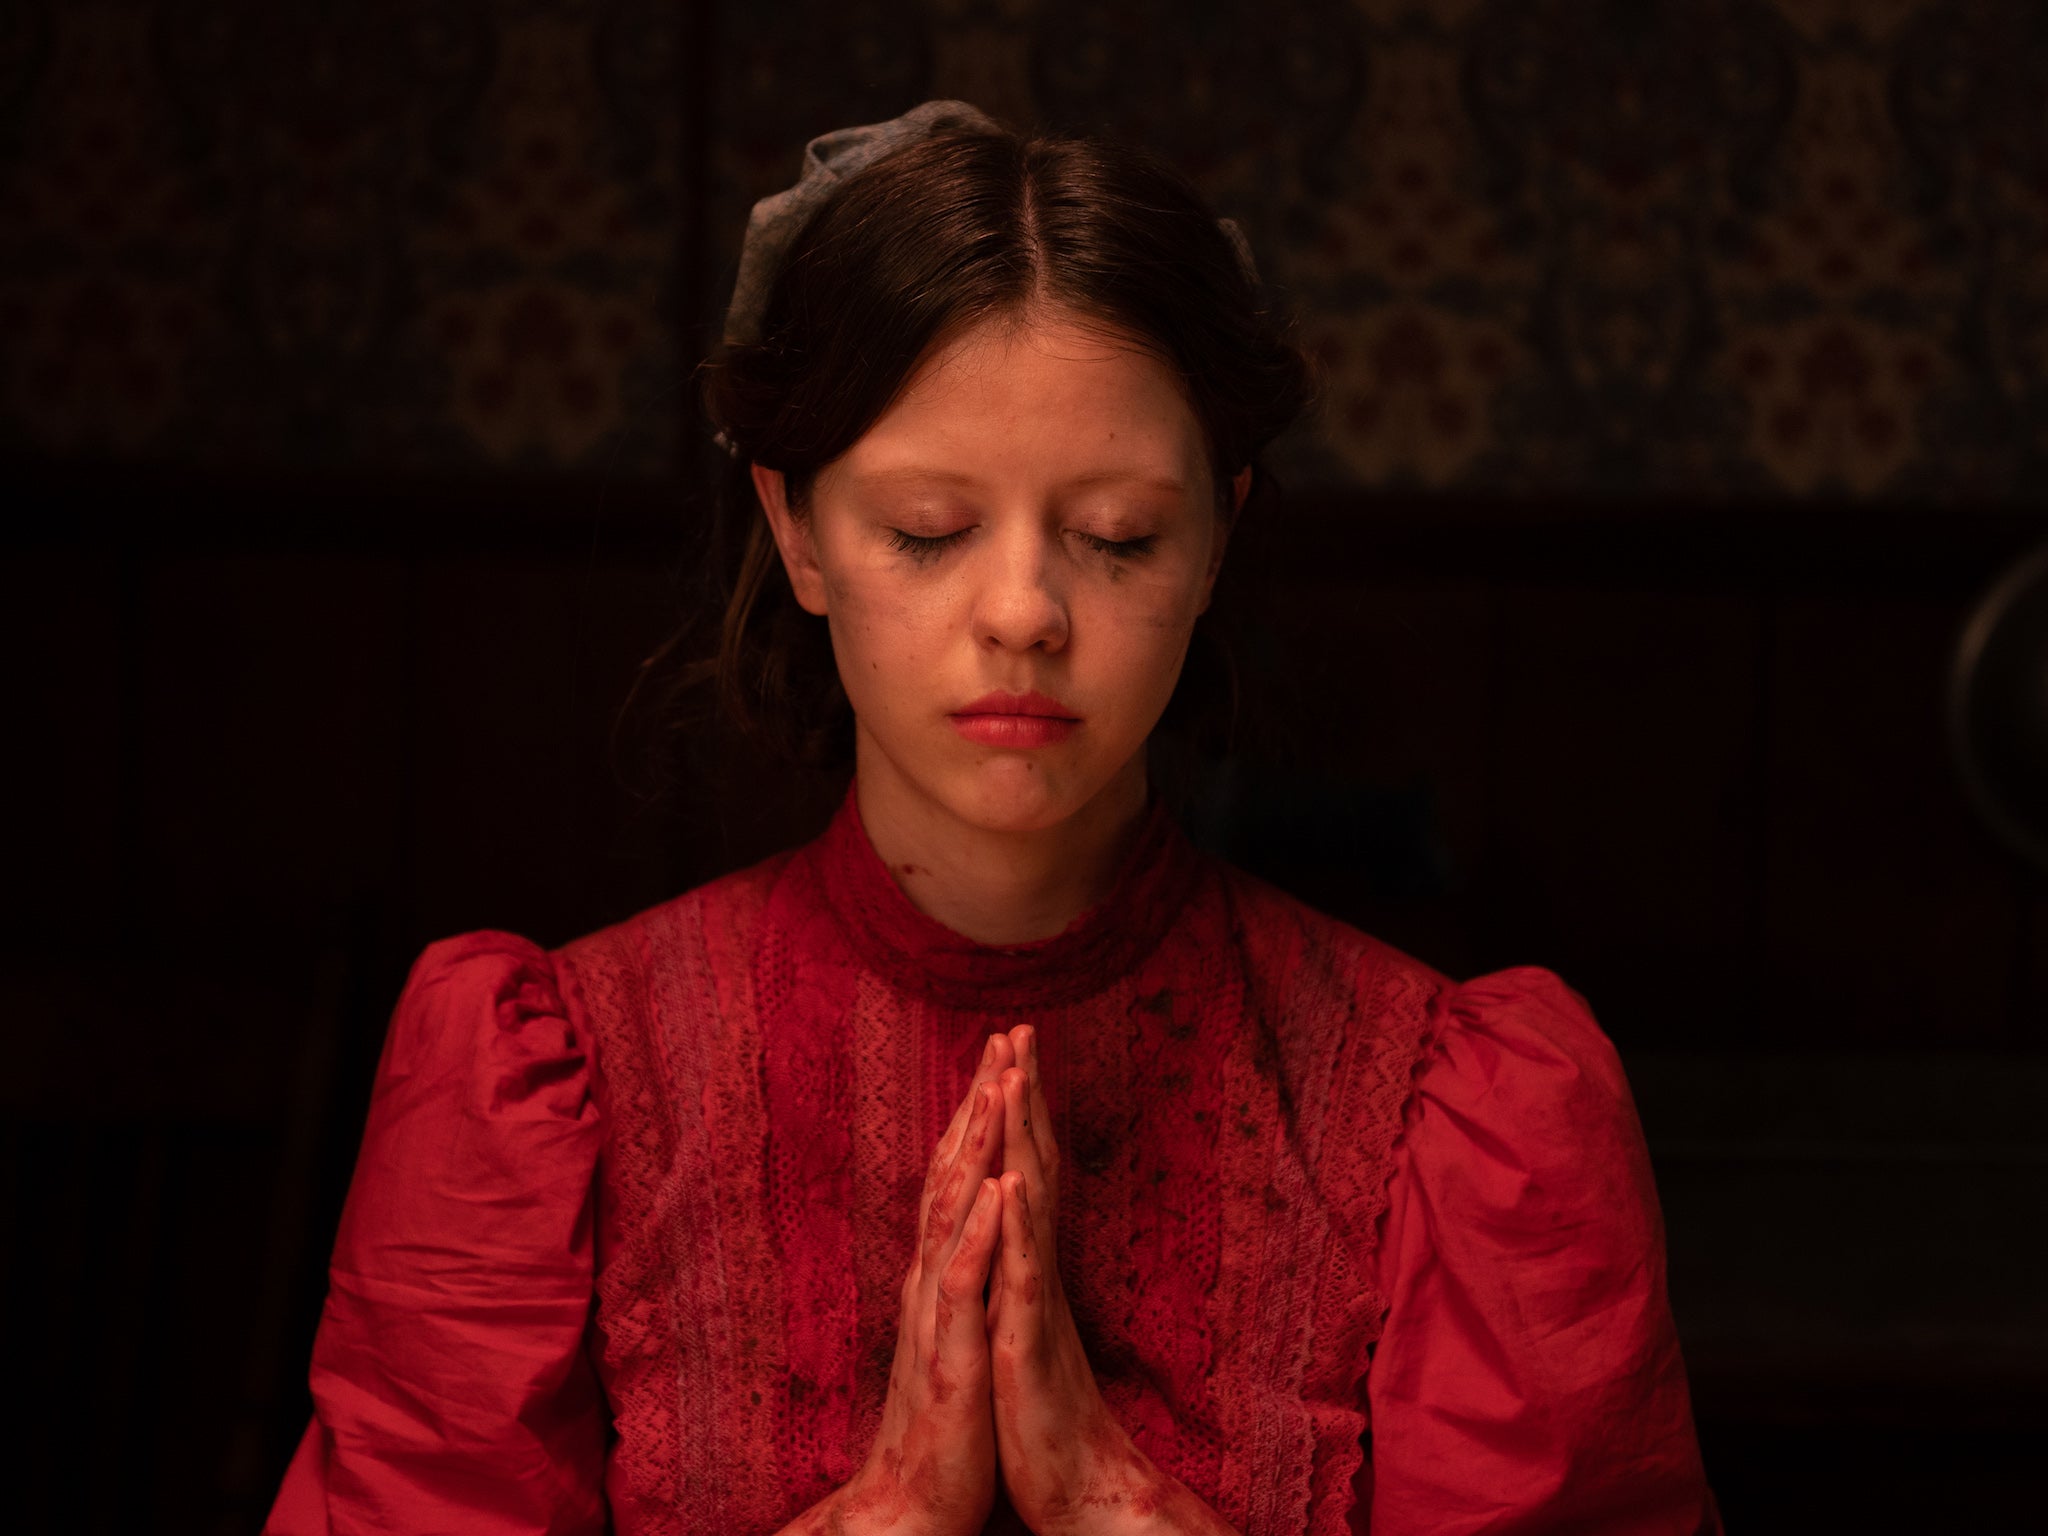 Mia Goth reprises her role as Pearl in ‘Pearl’